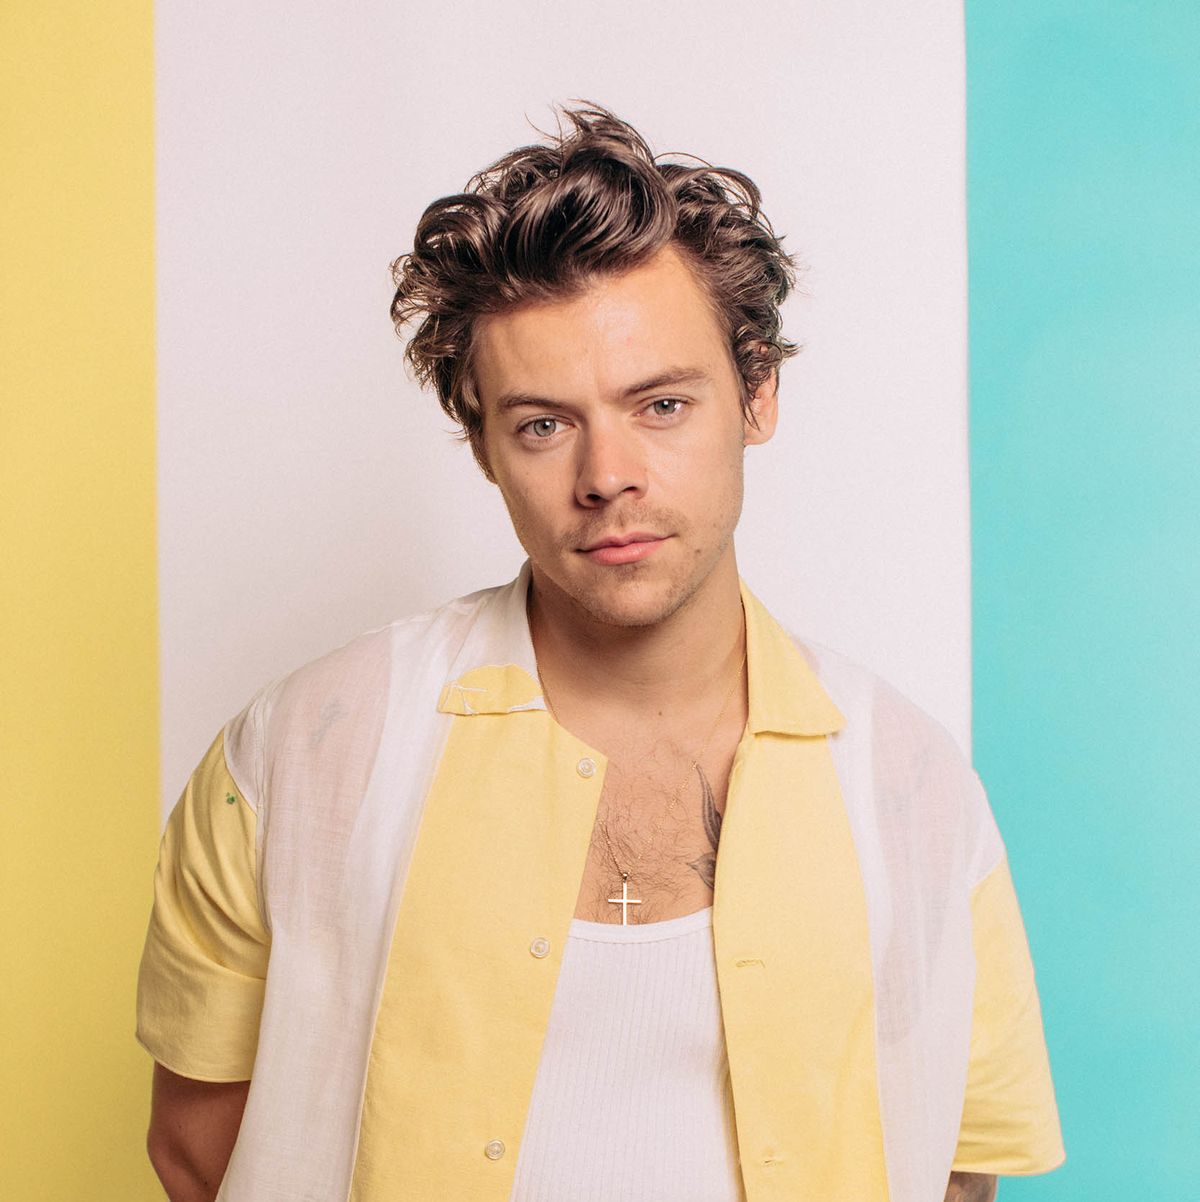 Harry Styles 'Fine Line' Album Review: He's Redefining Manhood for